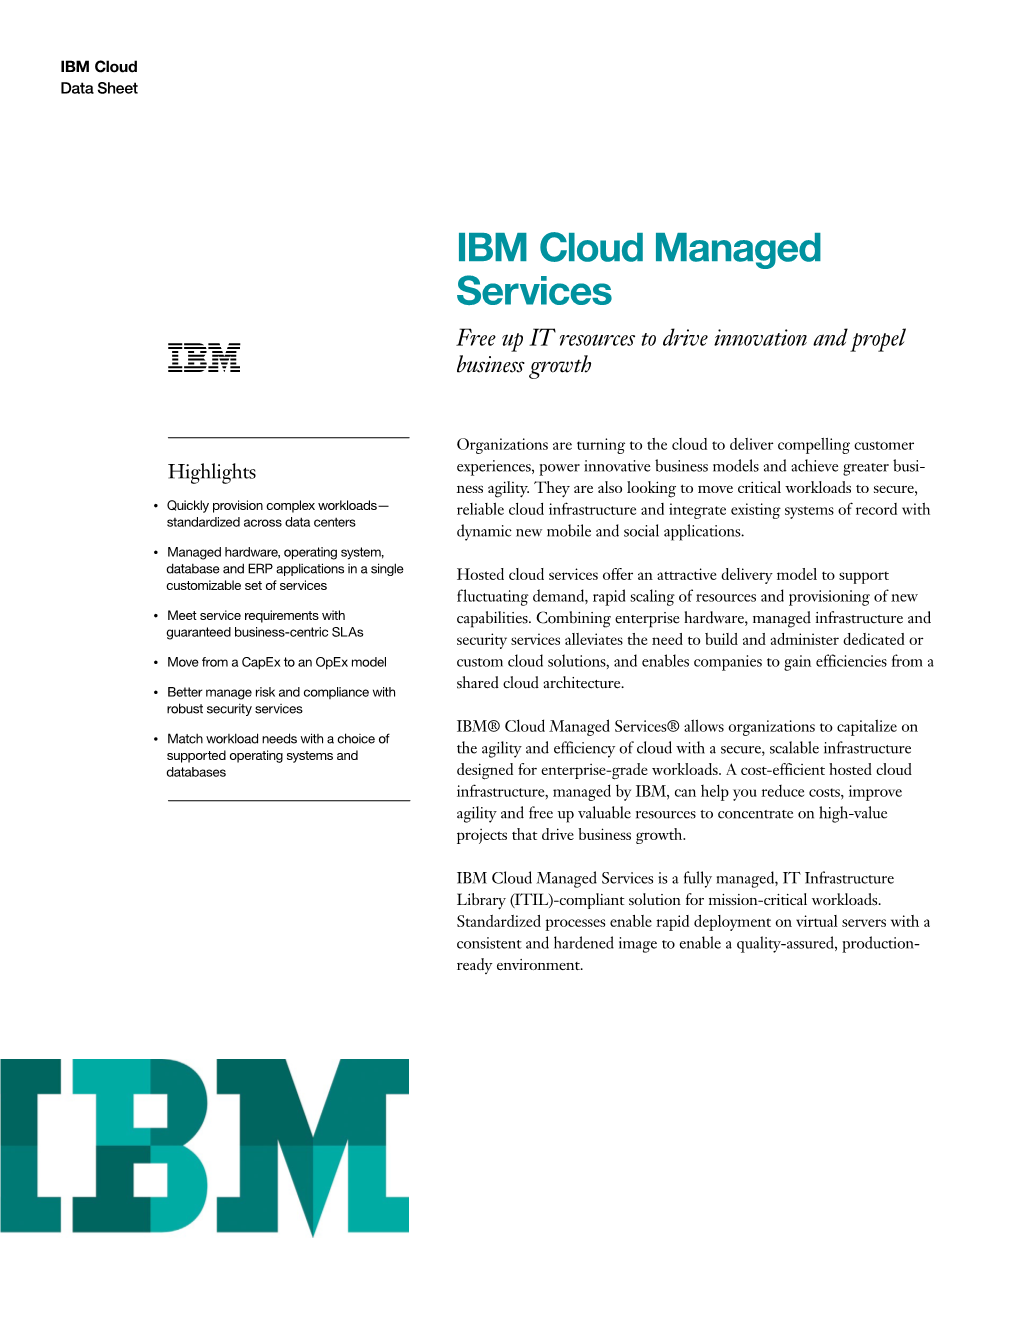 IBM Cloud Managed Services Free up IT Resources to Drive Innovation and Propel Business Growth